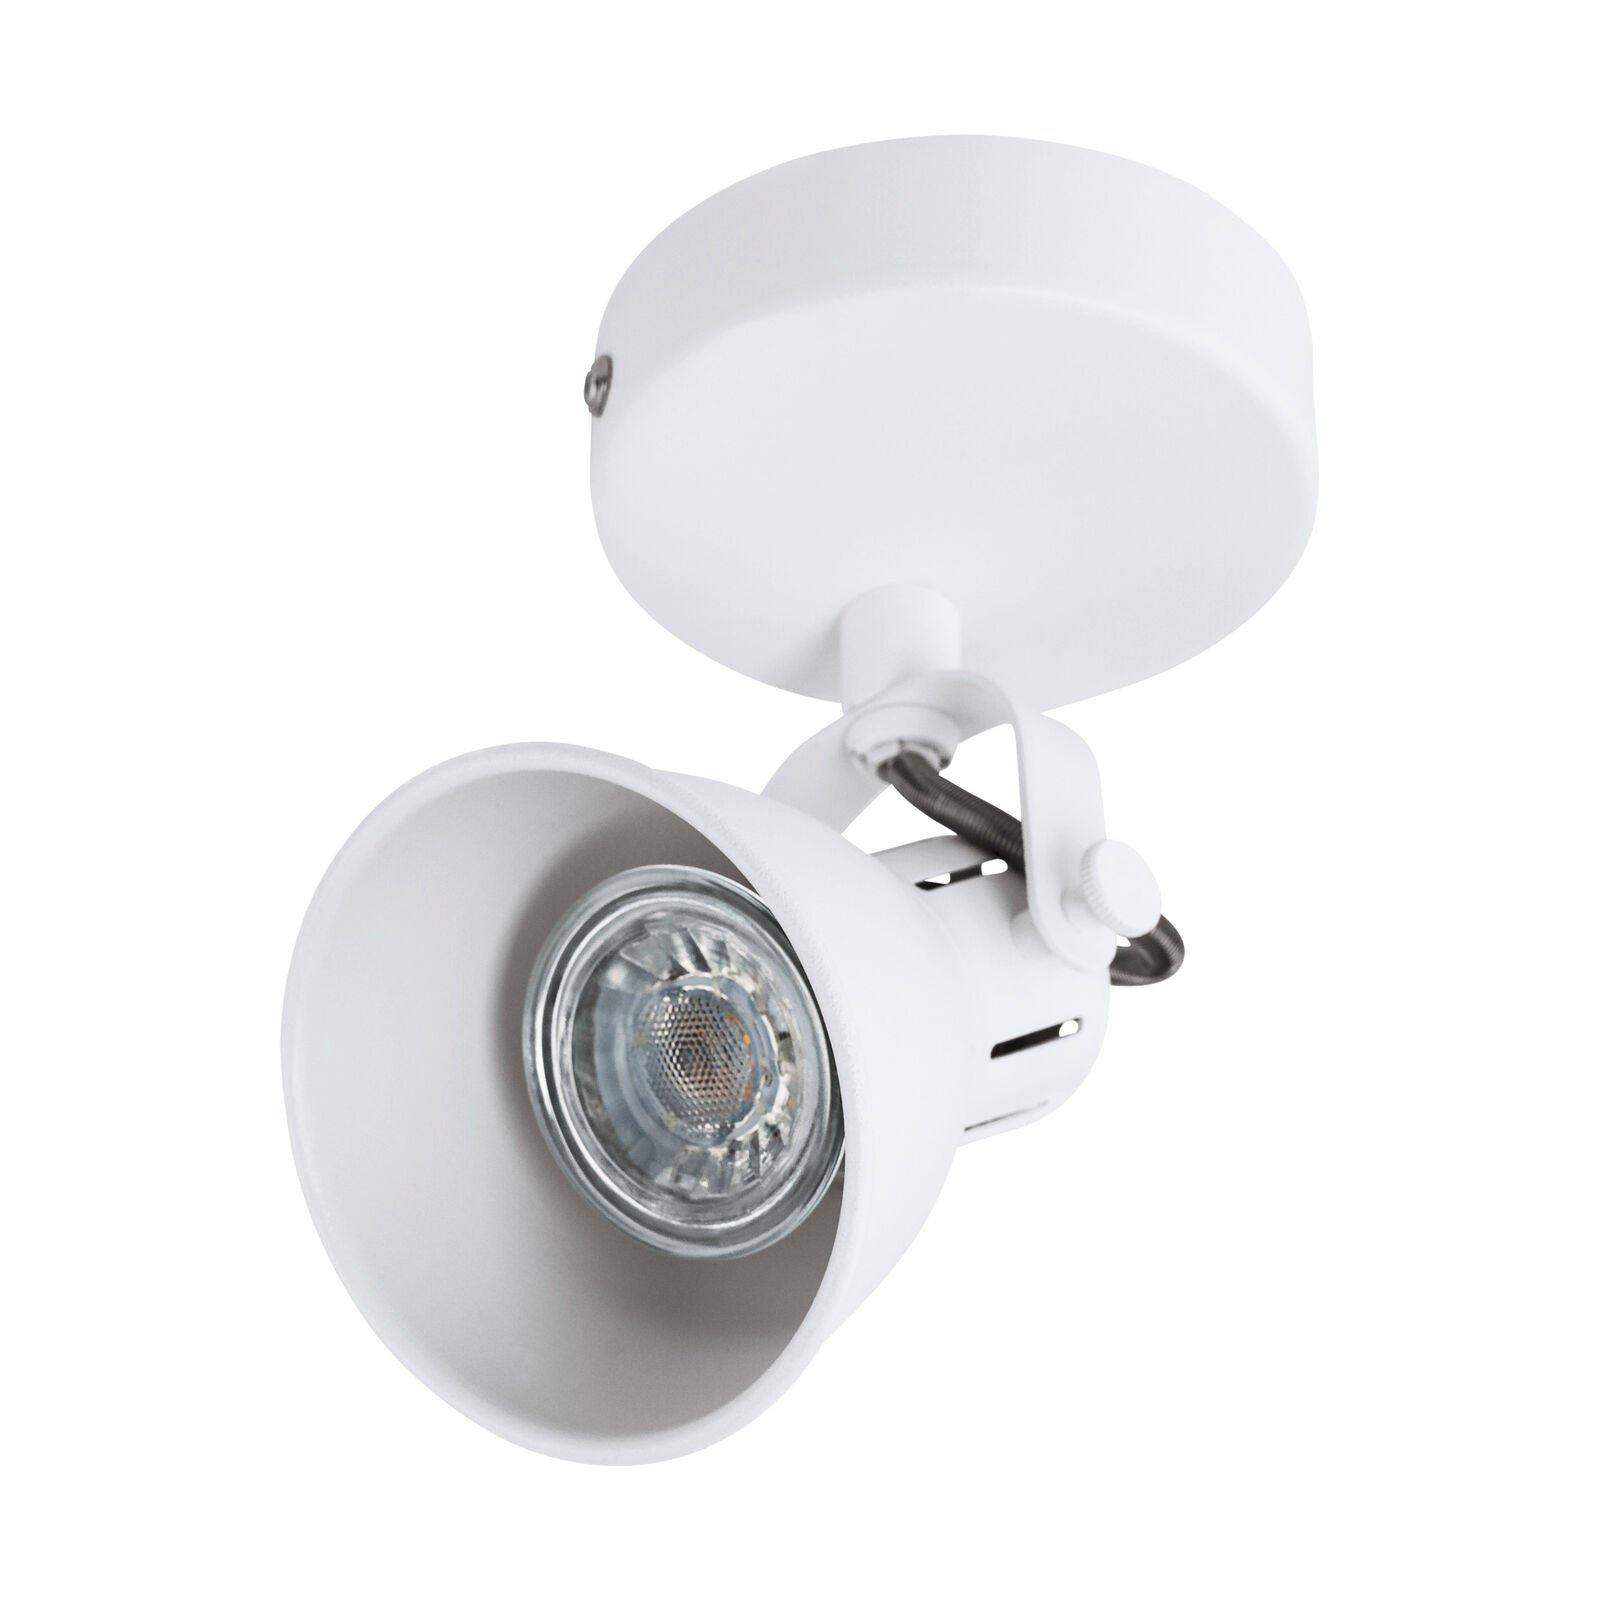 Wall Spot Light White Steel Wall Plate and Lamp Shade Bulb GU10 1x3.3W Included